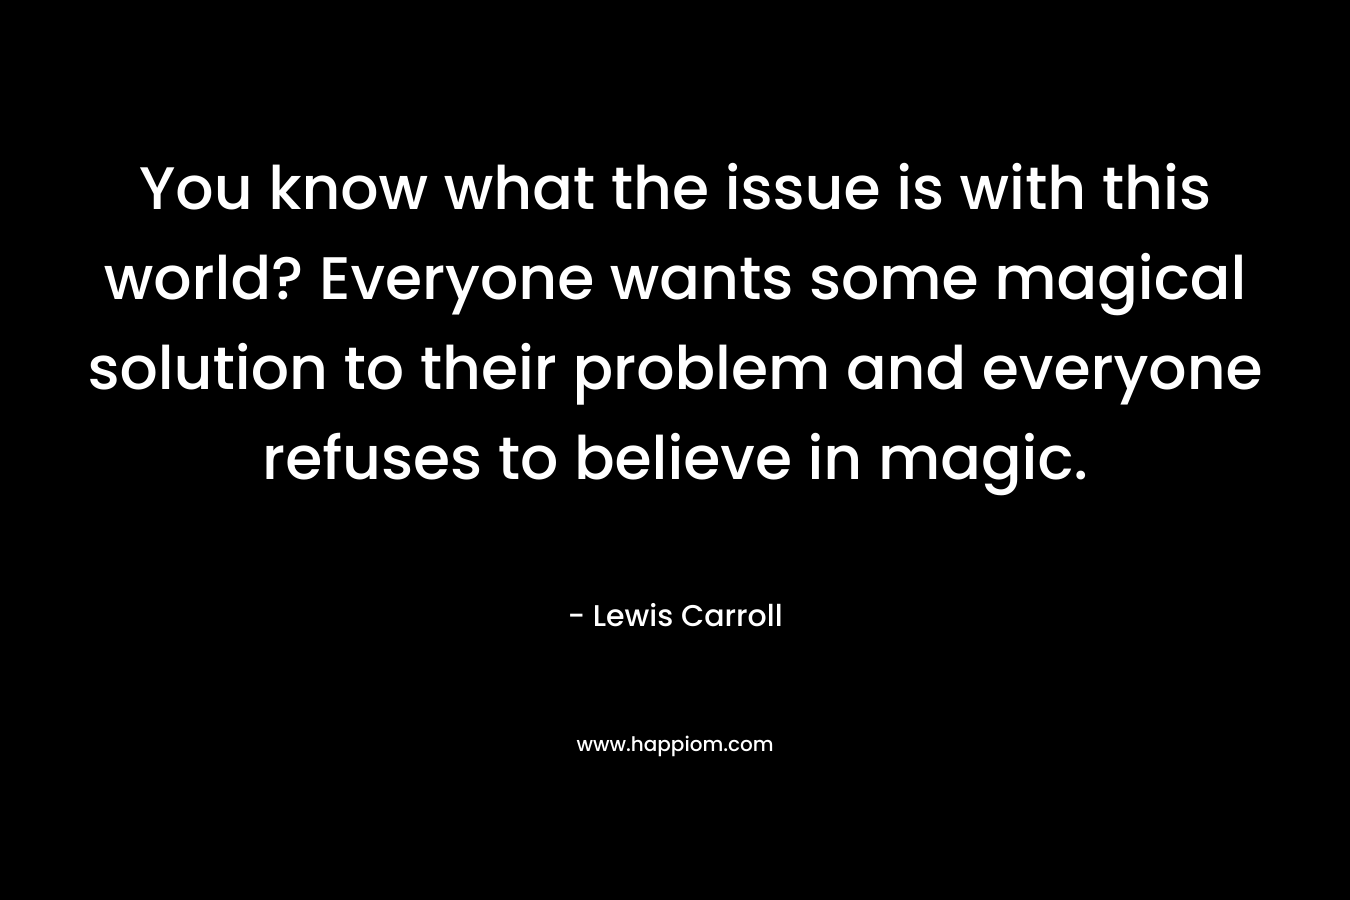 You know what the issue is with this world? Everyone wants some magical solution to their problem and everyone refuses to believe in magic.